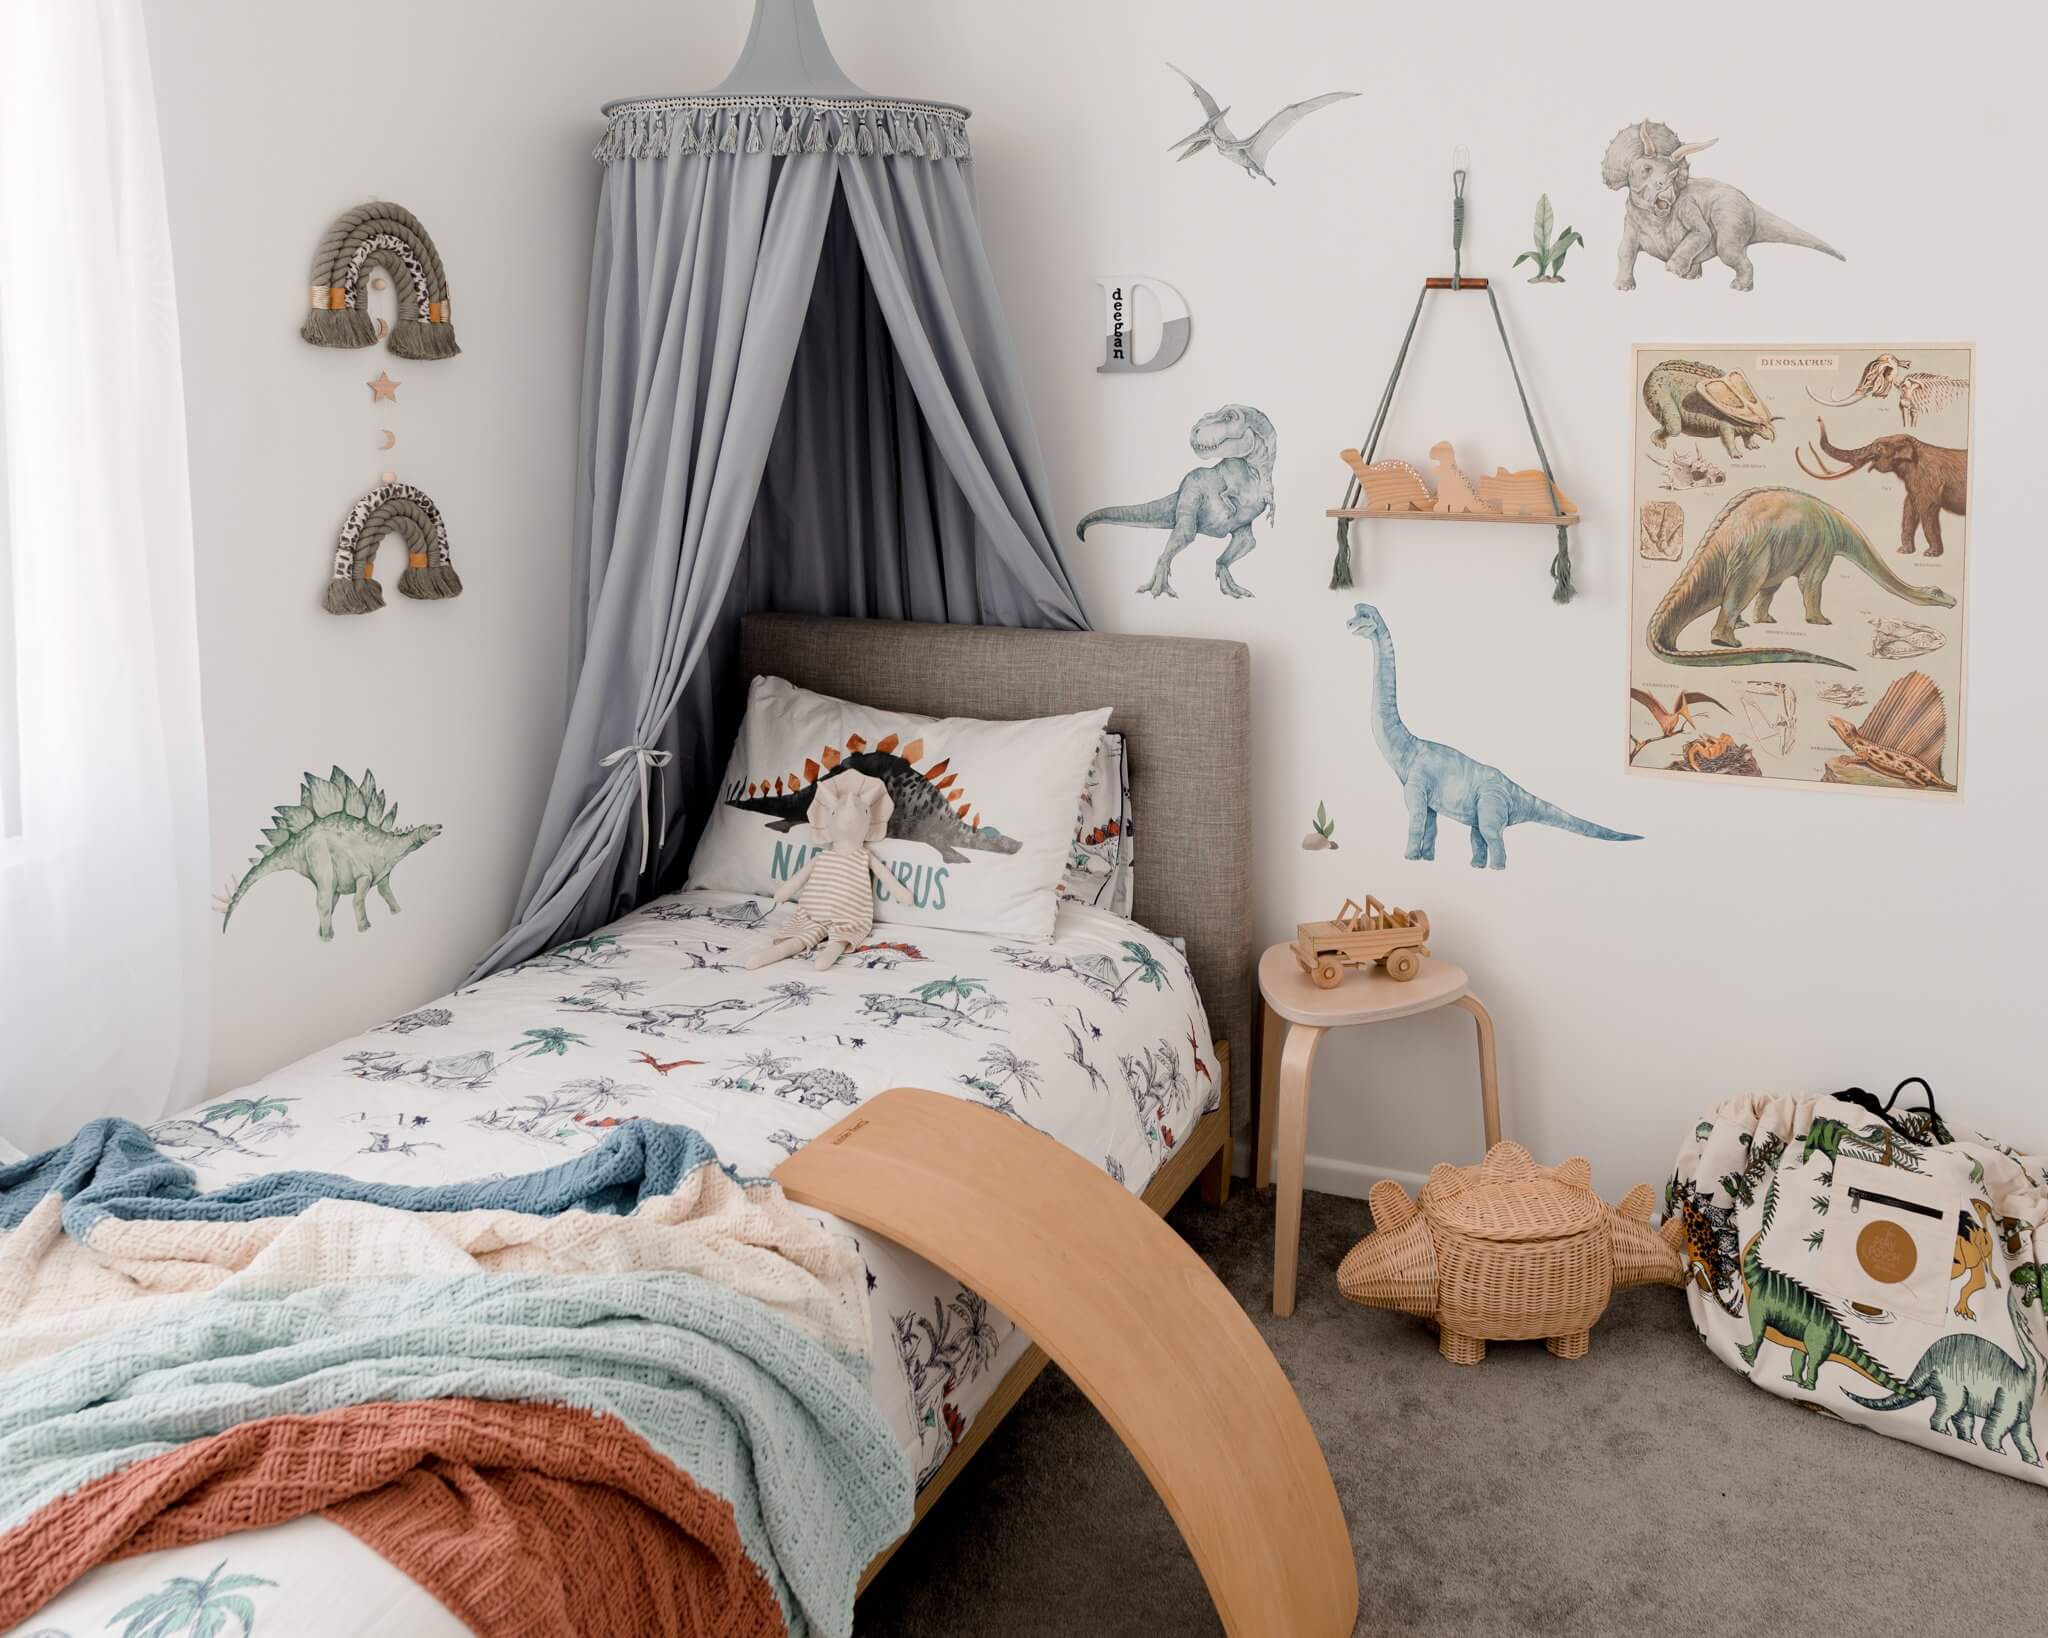 Dreamy Hideaways: Kids’ Room Canopies for Magical Spaces